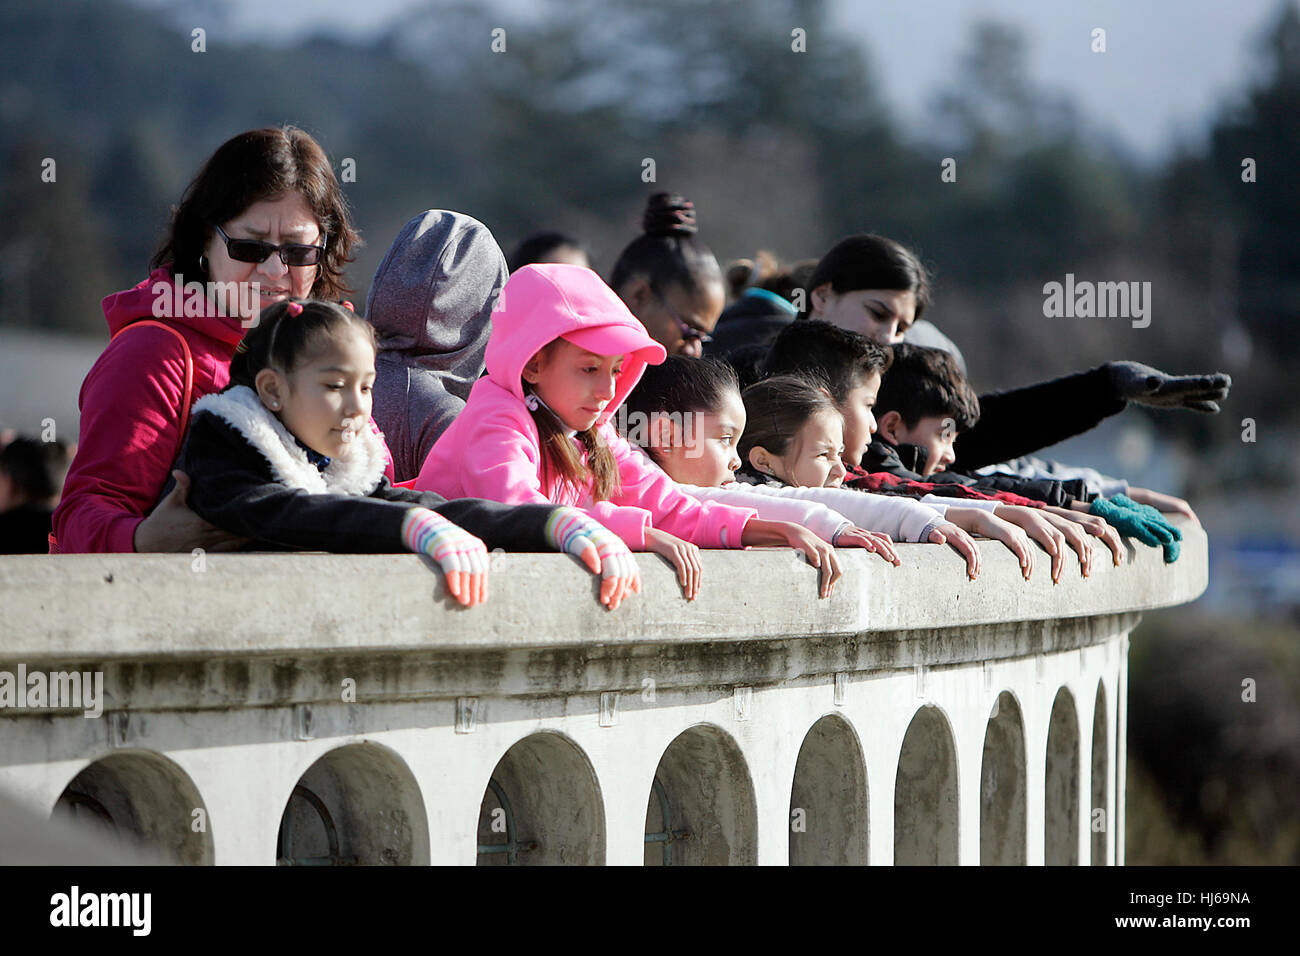 Napa, CA, USA. 25th Jan, 2017. Shearer Elementary School students pause on the Third Street bridge overlooking the Napa River on Wednesday during an Outdoor Classroom sponsored by the Napa Valley Vine Trail. Shearer was the first school to take advantage of the Vine Trail program, which teaches students about the neighborhood, the trail and river. All four of the 1st grade classes, about 80 students, took part in the excursion as they walked from their school, through Old Town Napa to the Vine Trail at Third Street and Soscol Avenue. Credit: Napa Valley Register/ZUMA Wire/Alamy Live News Stock Photo